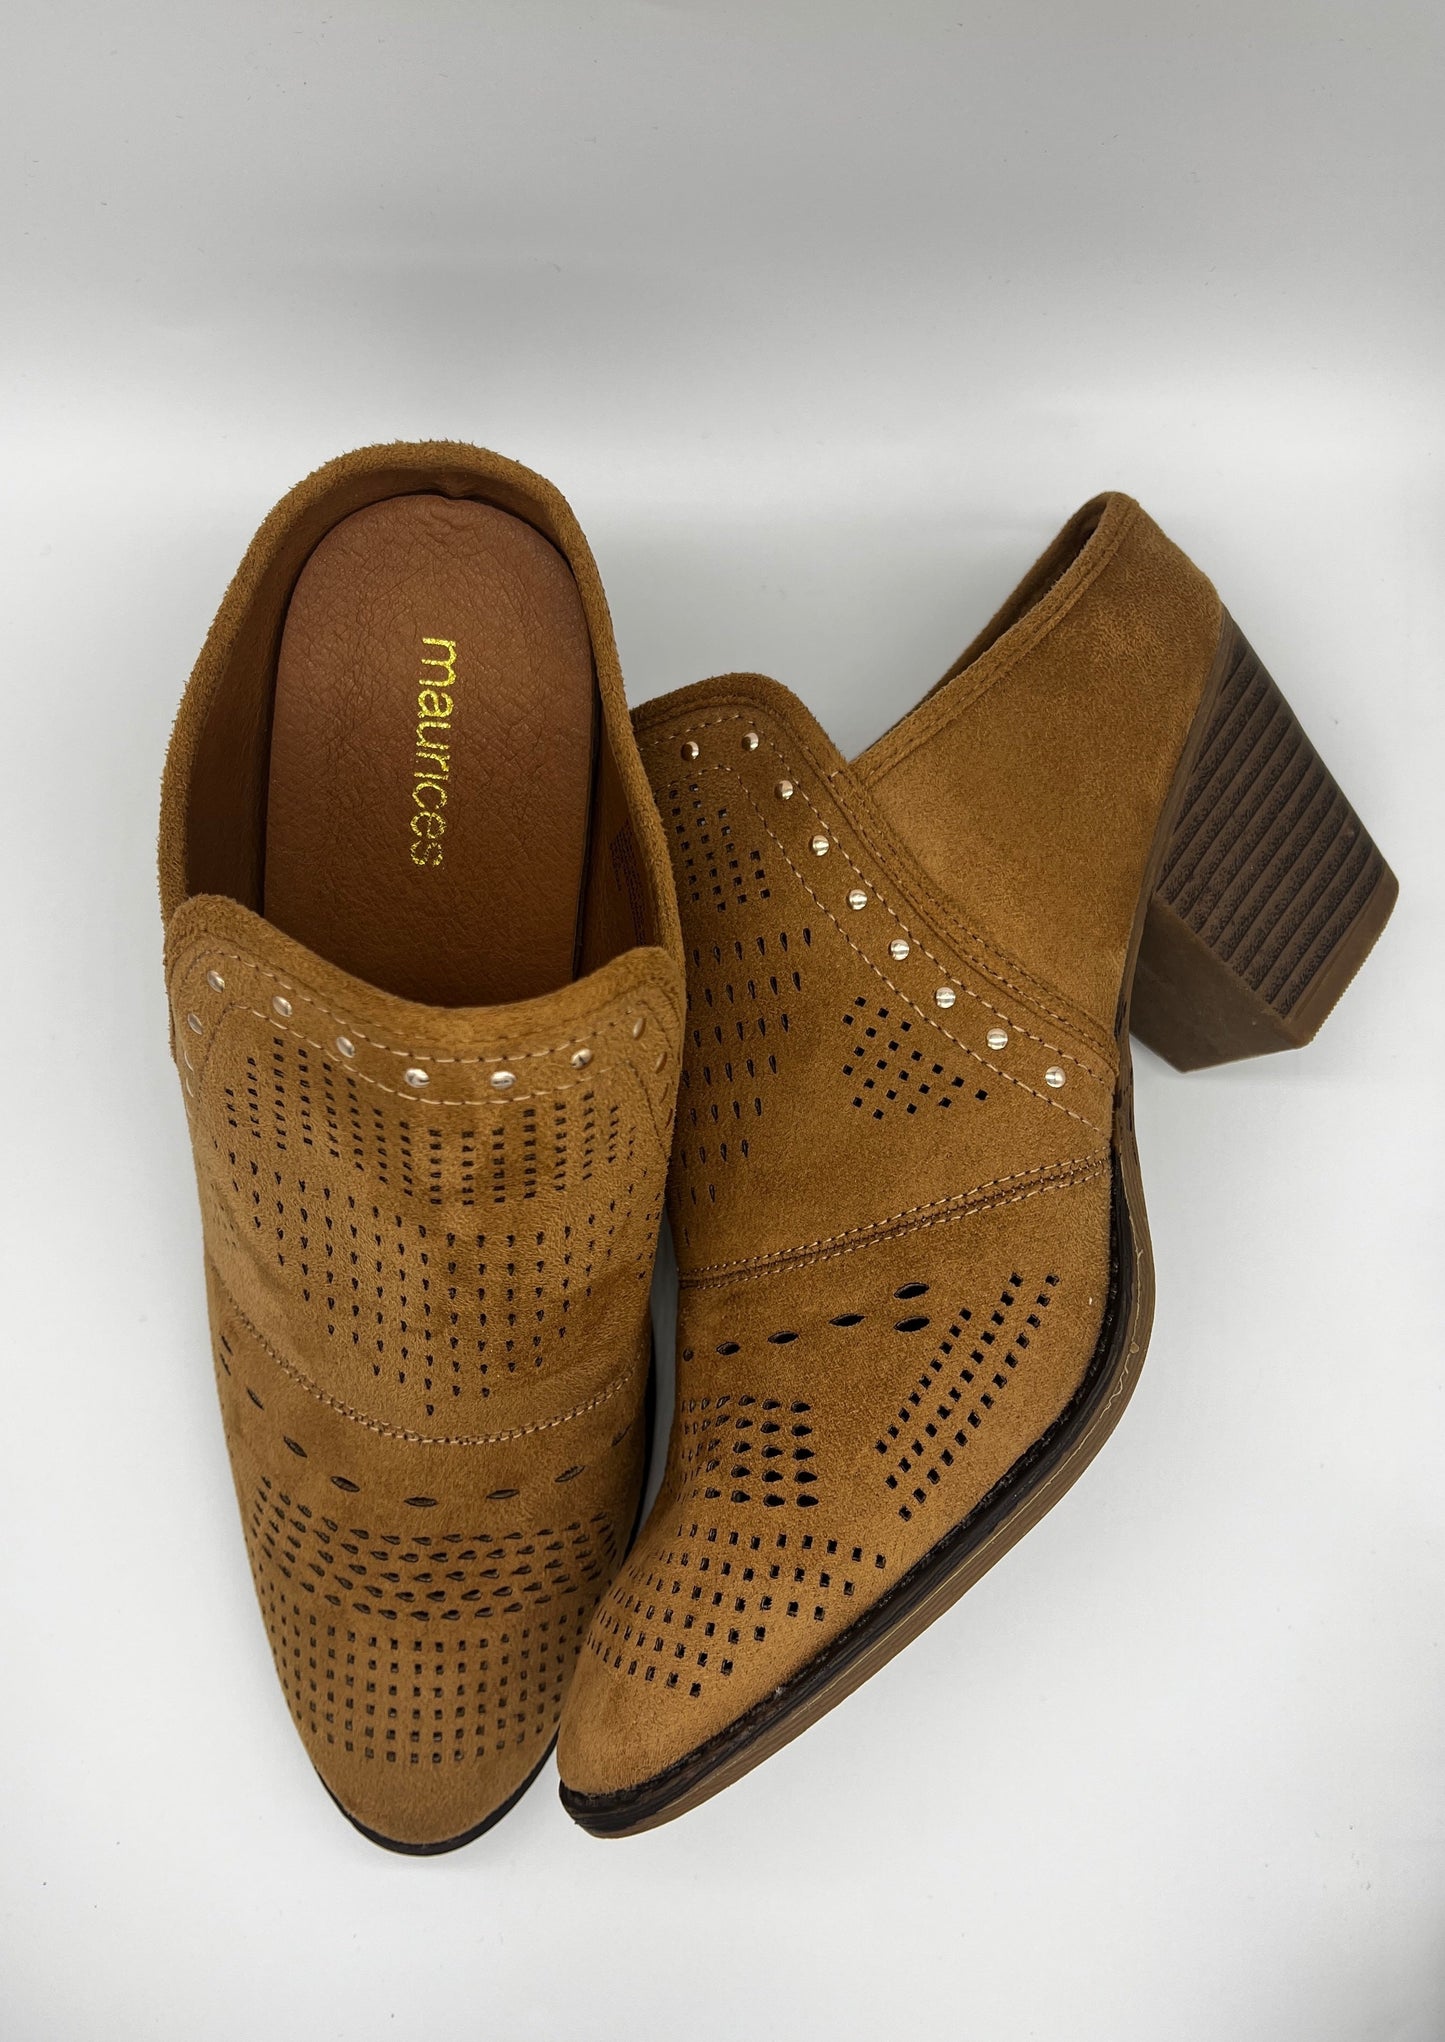 Tan Mule Booties By Maurices